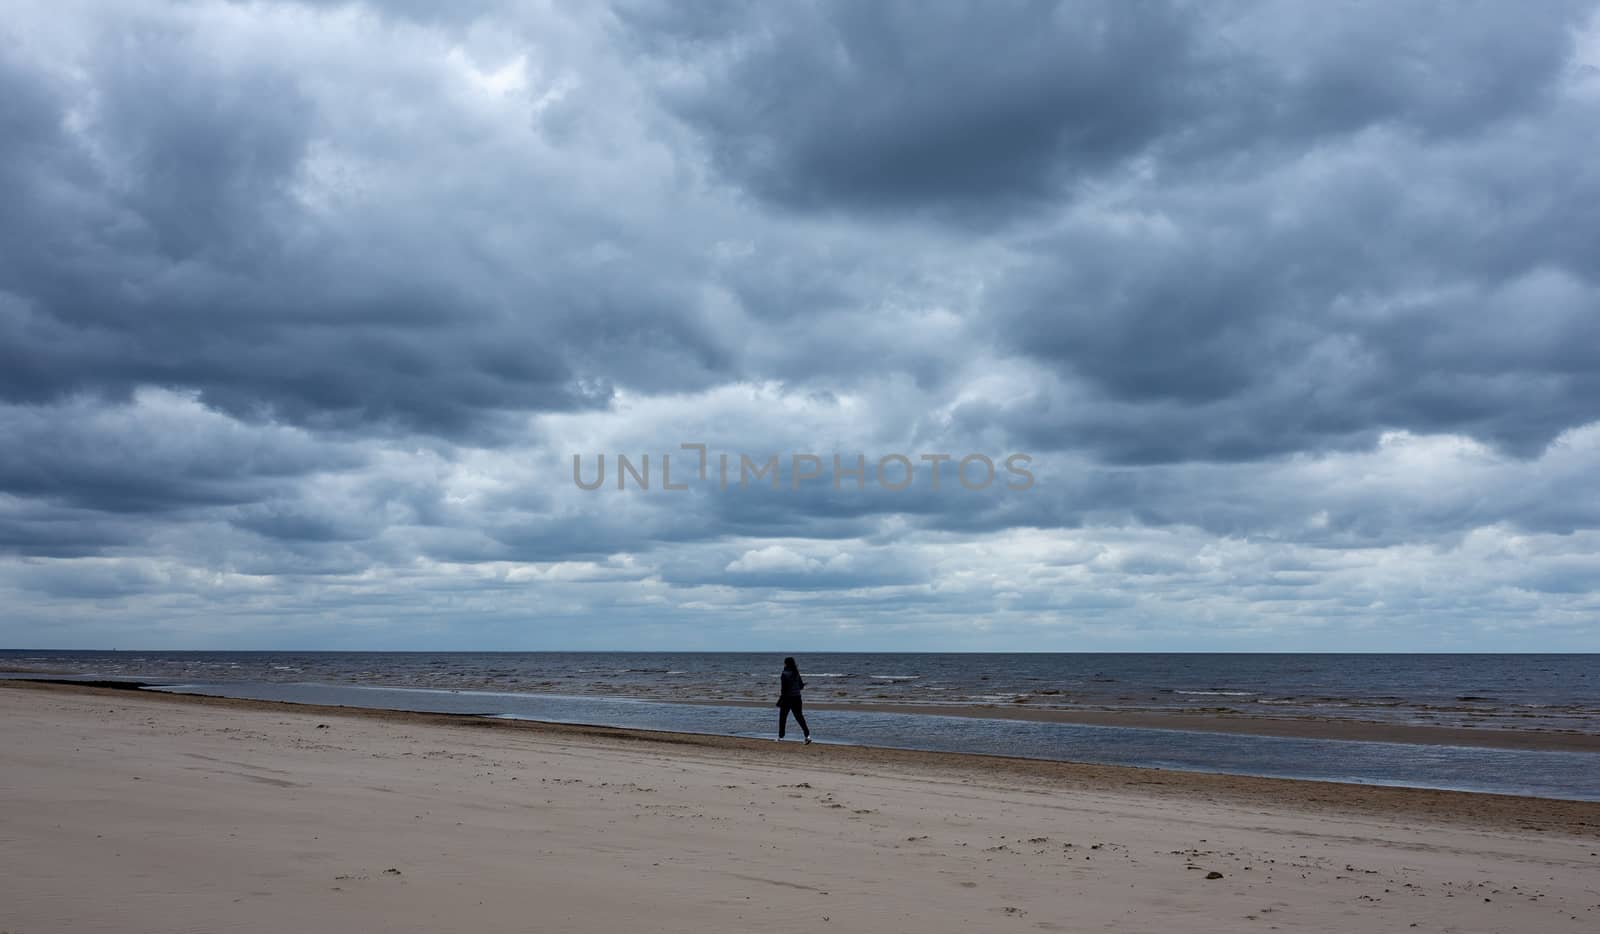 A girl in a warm black jacket walks along the seashore on a sandy beach in cloudy, cool weather.